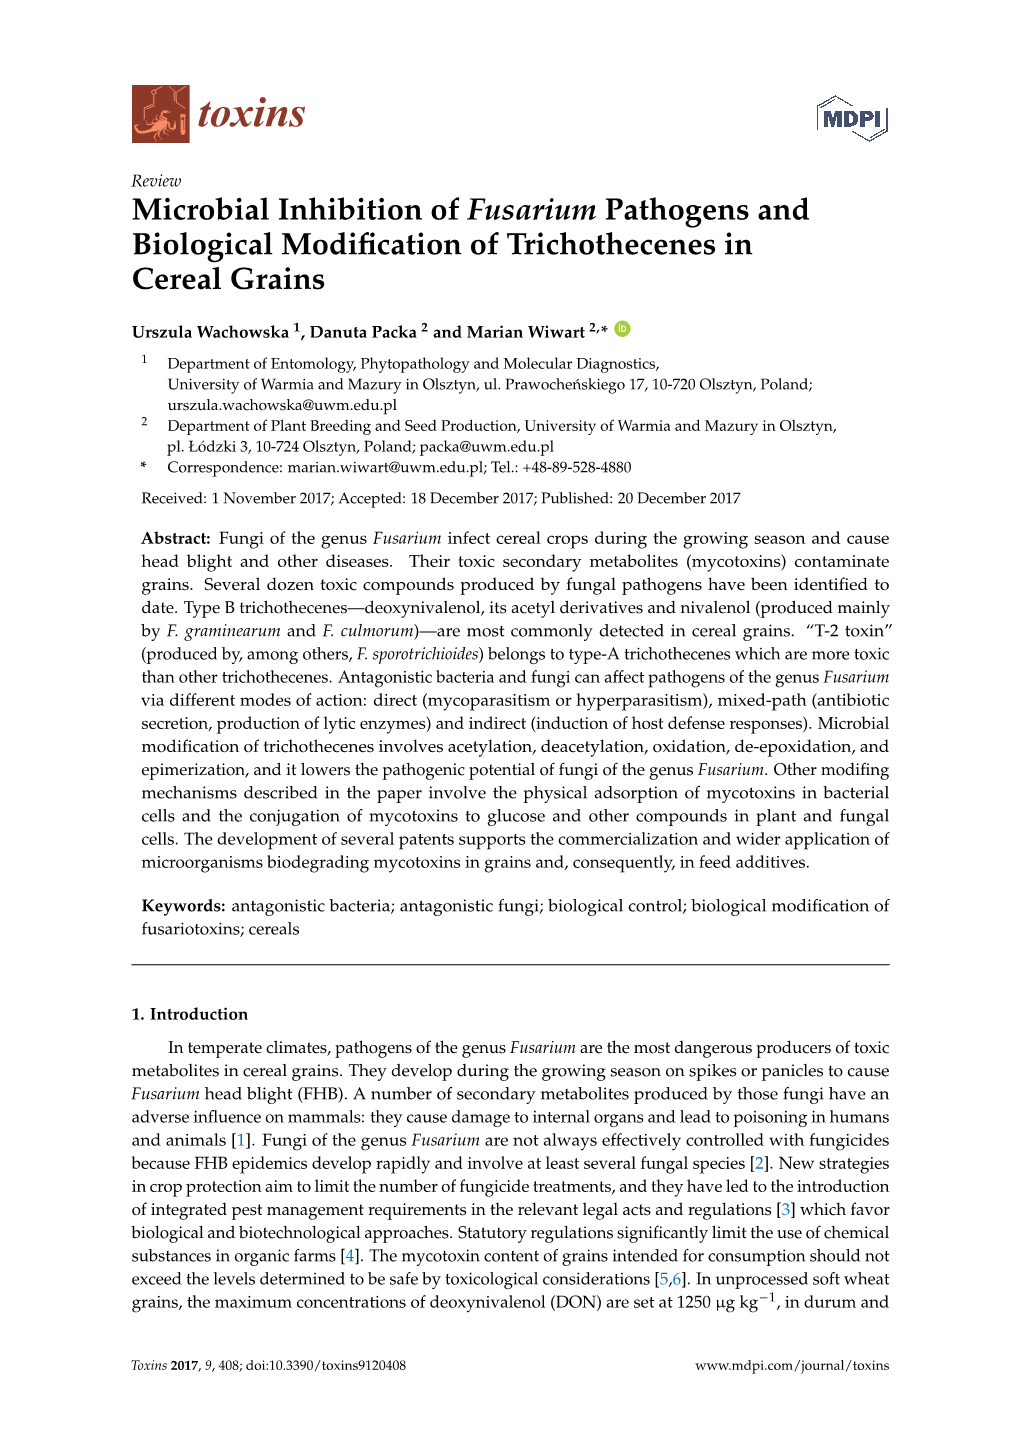 Microbial Inhibition of Fusarium Pathogens and Biological Modiﬁcation of Trichothecenes in Cereal Grains